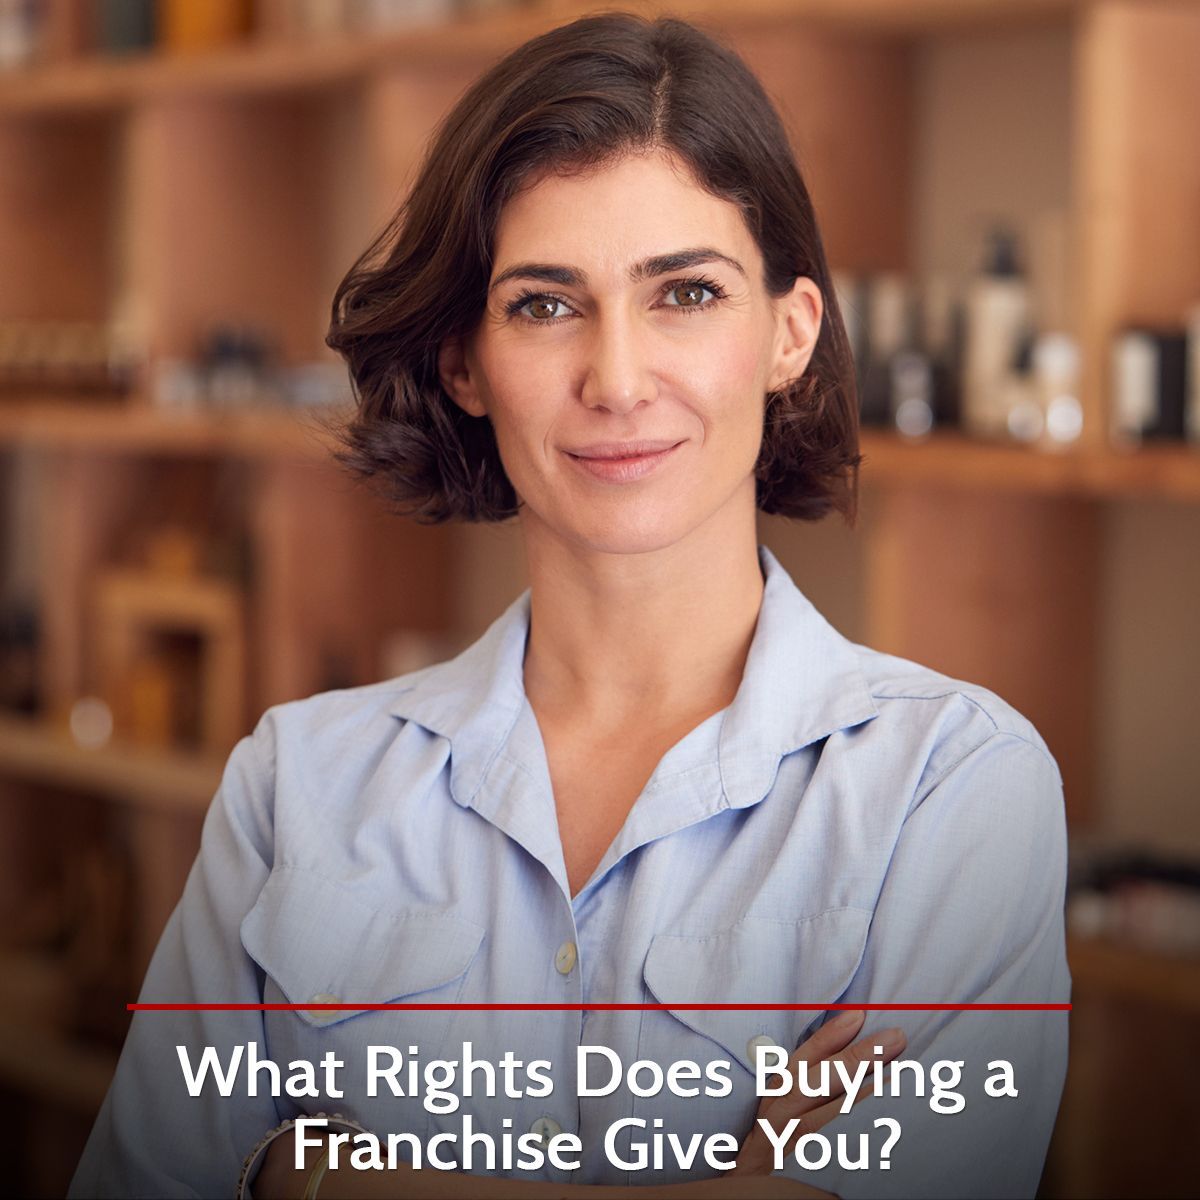 What Rights Does Buying a Franchise Give You?